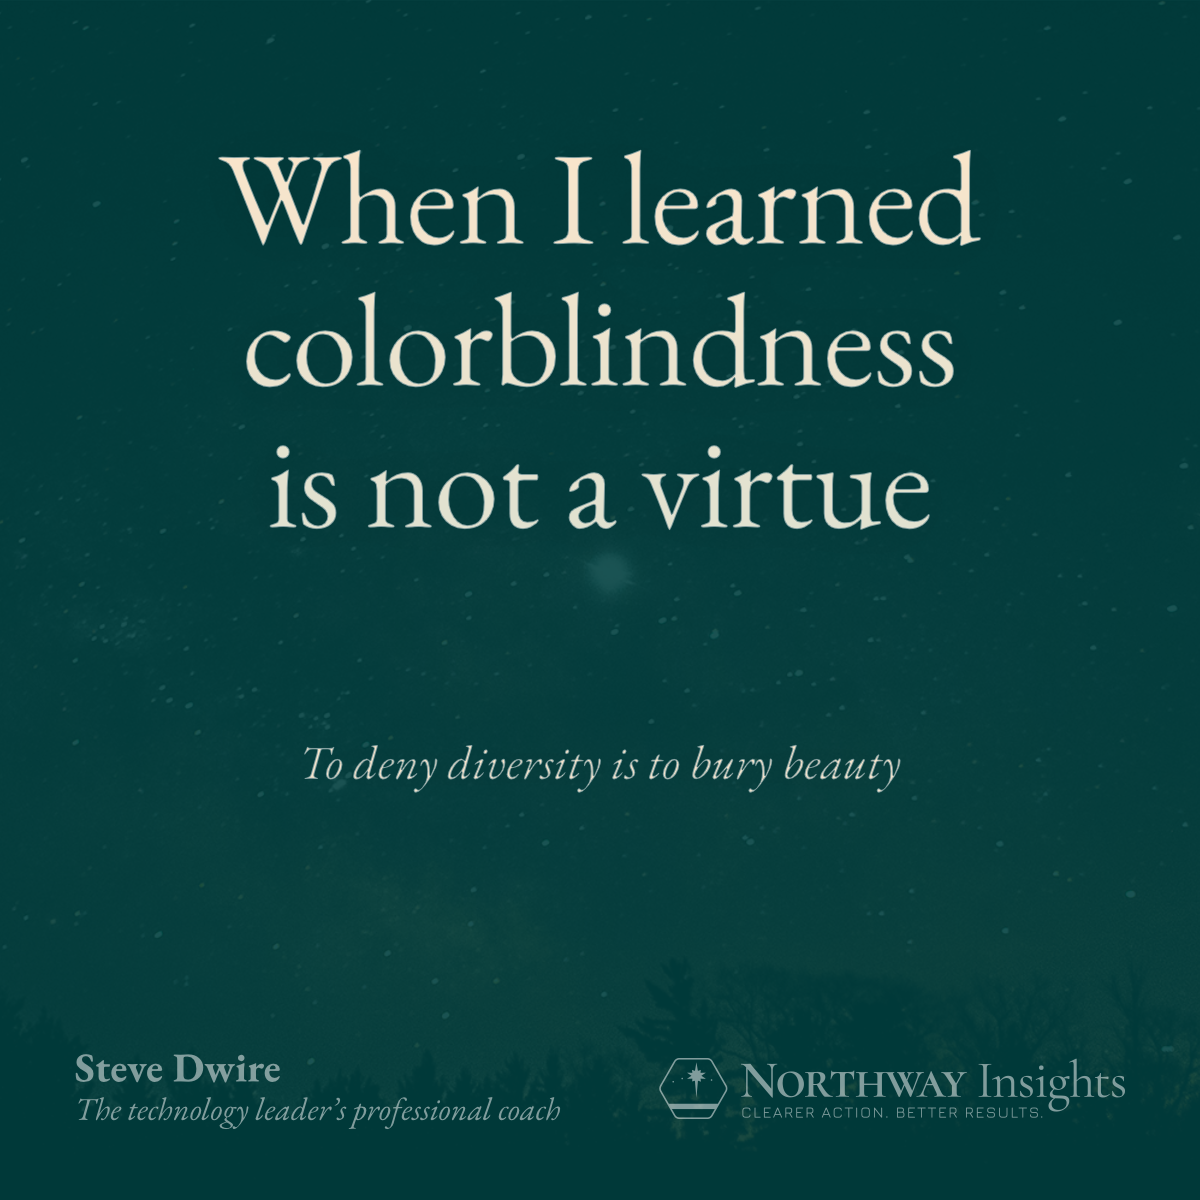 When I learned colorblindness is not a virtue. (To deny diversity is to bury beauty.)